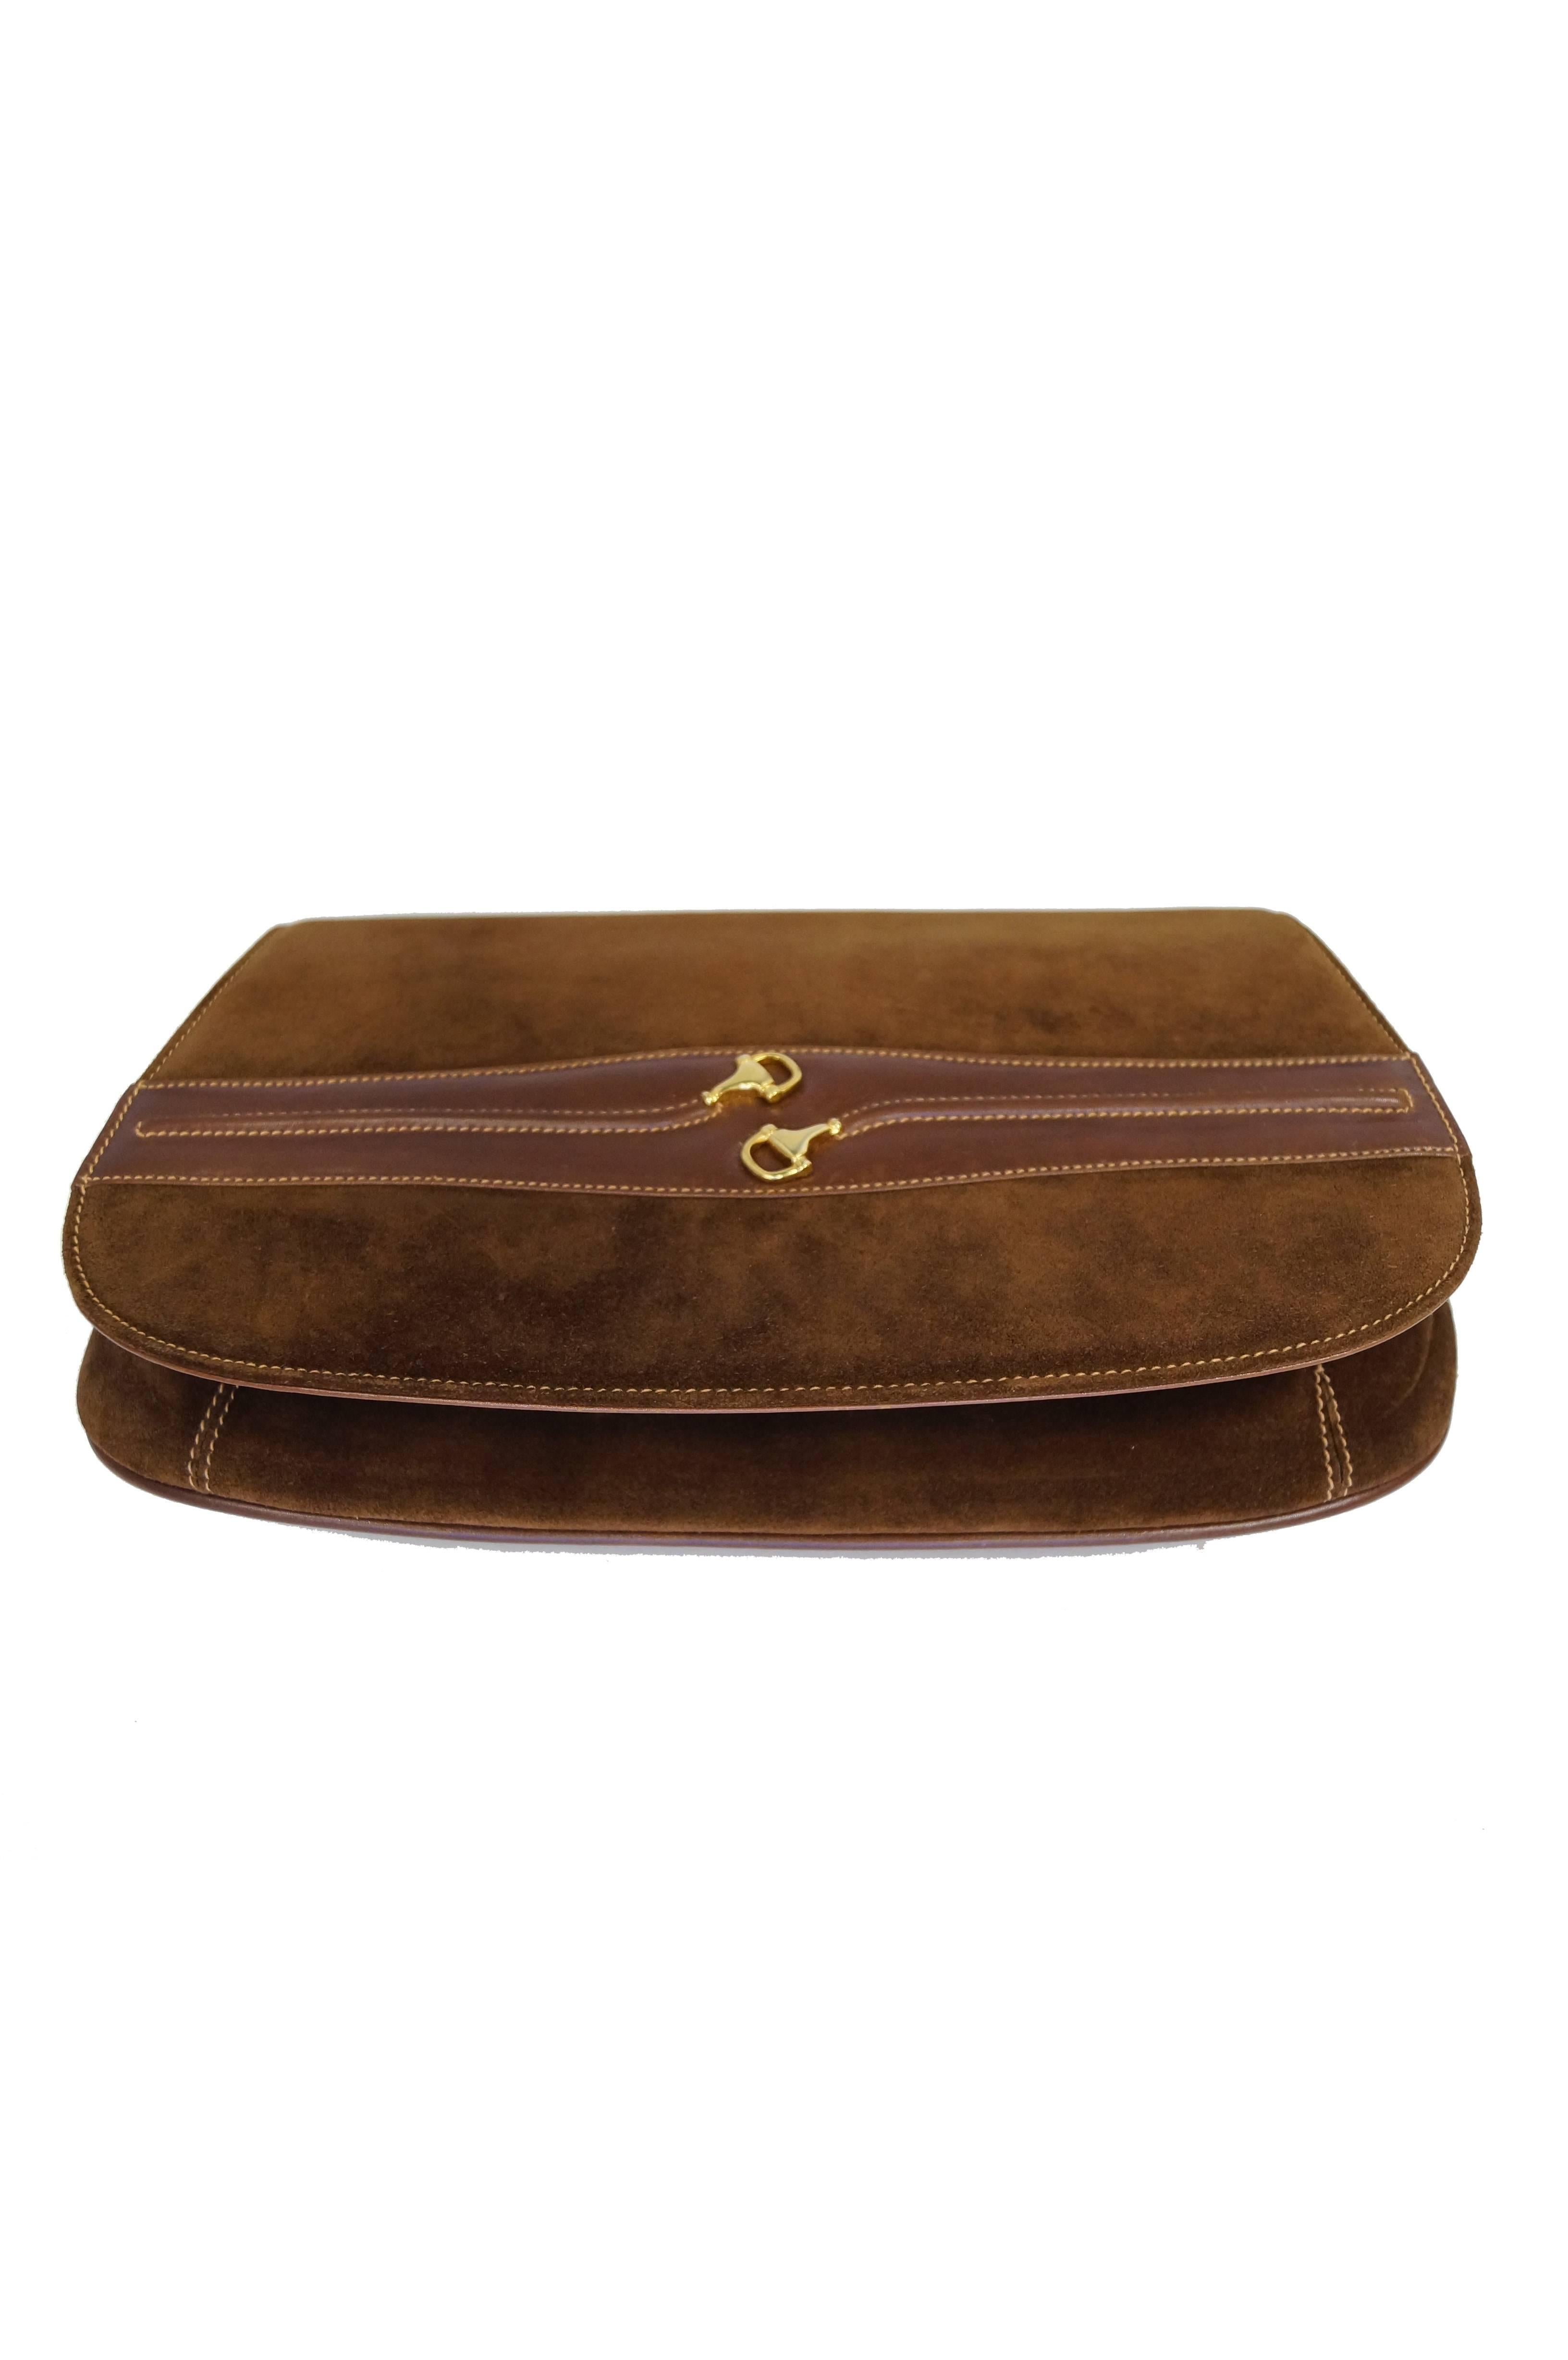 Iconic 1970s Gucci Brown Italian Suede and Leather Clutch 1